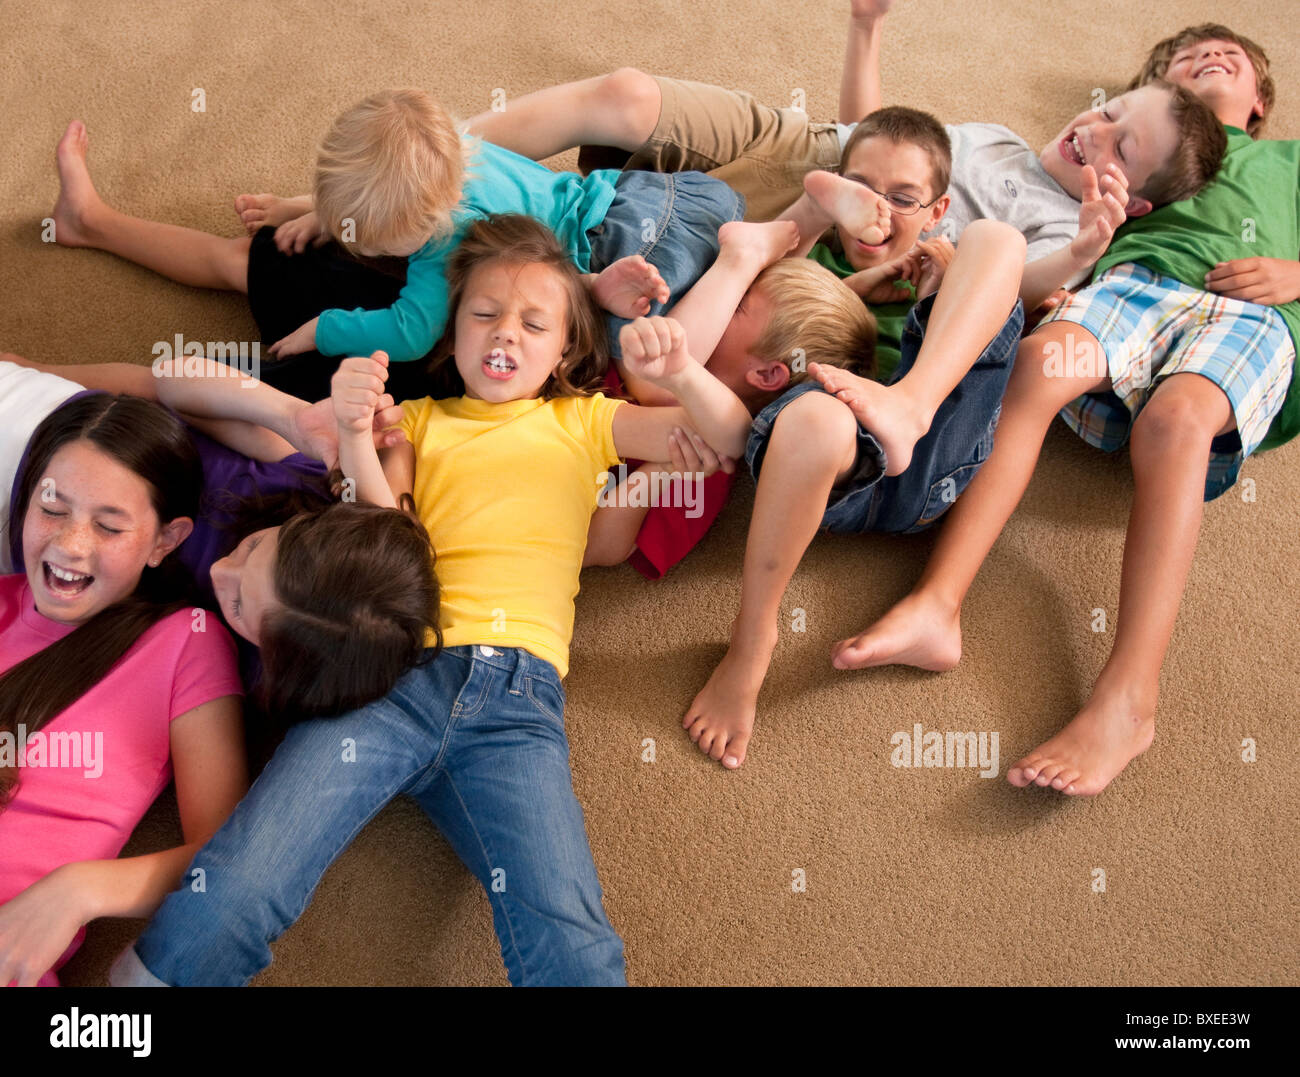 Group of children playing on floor Stock Photo